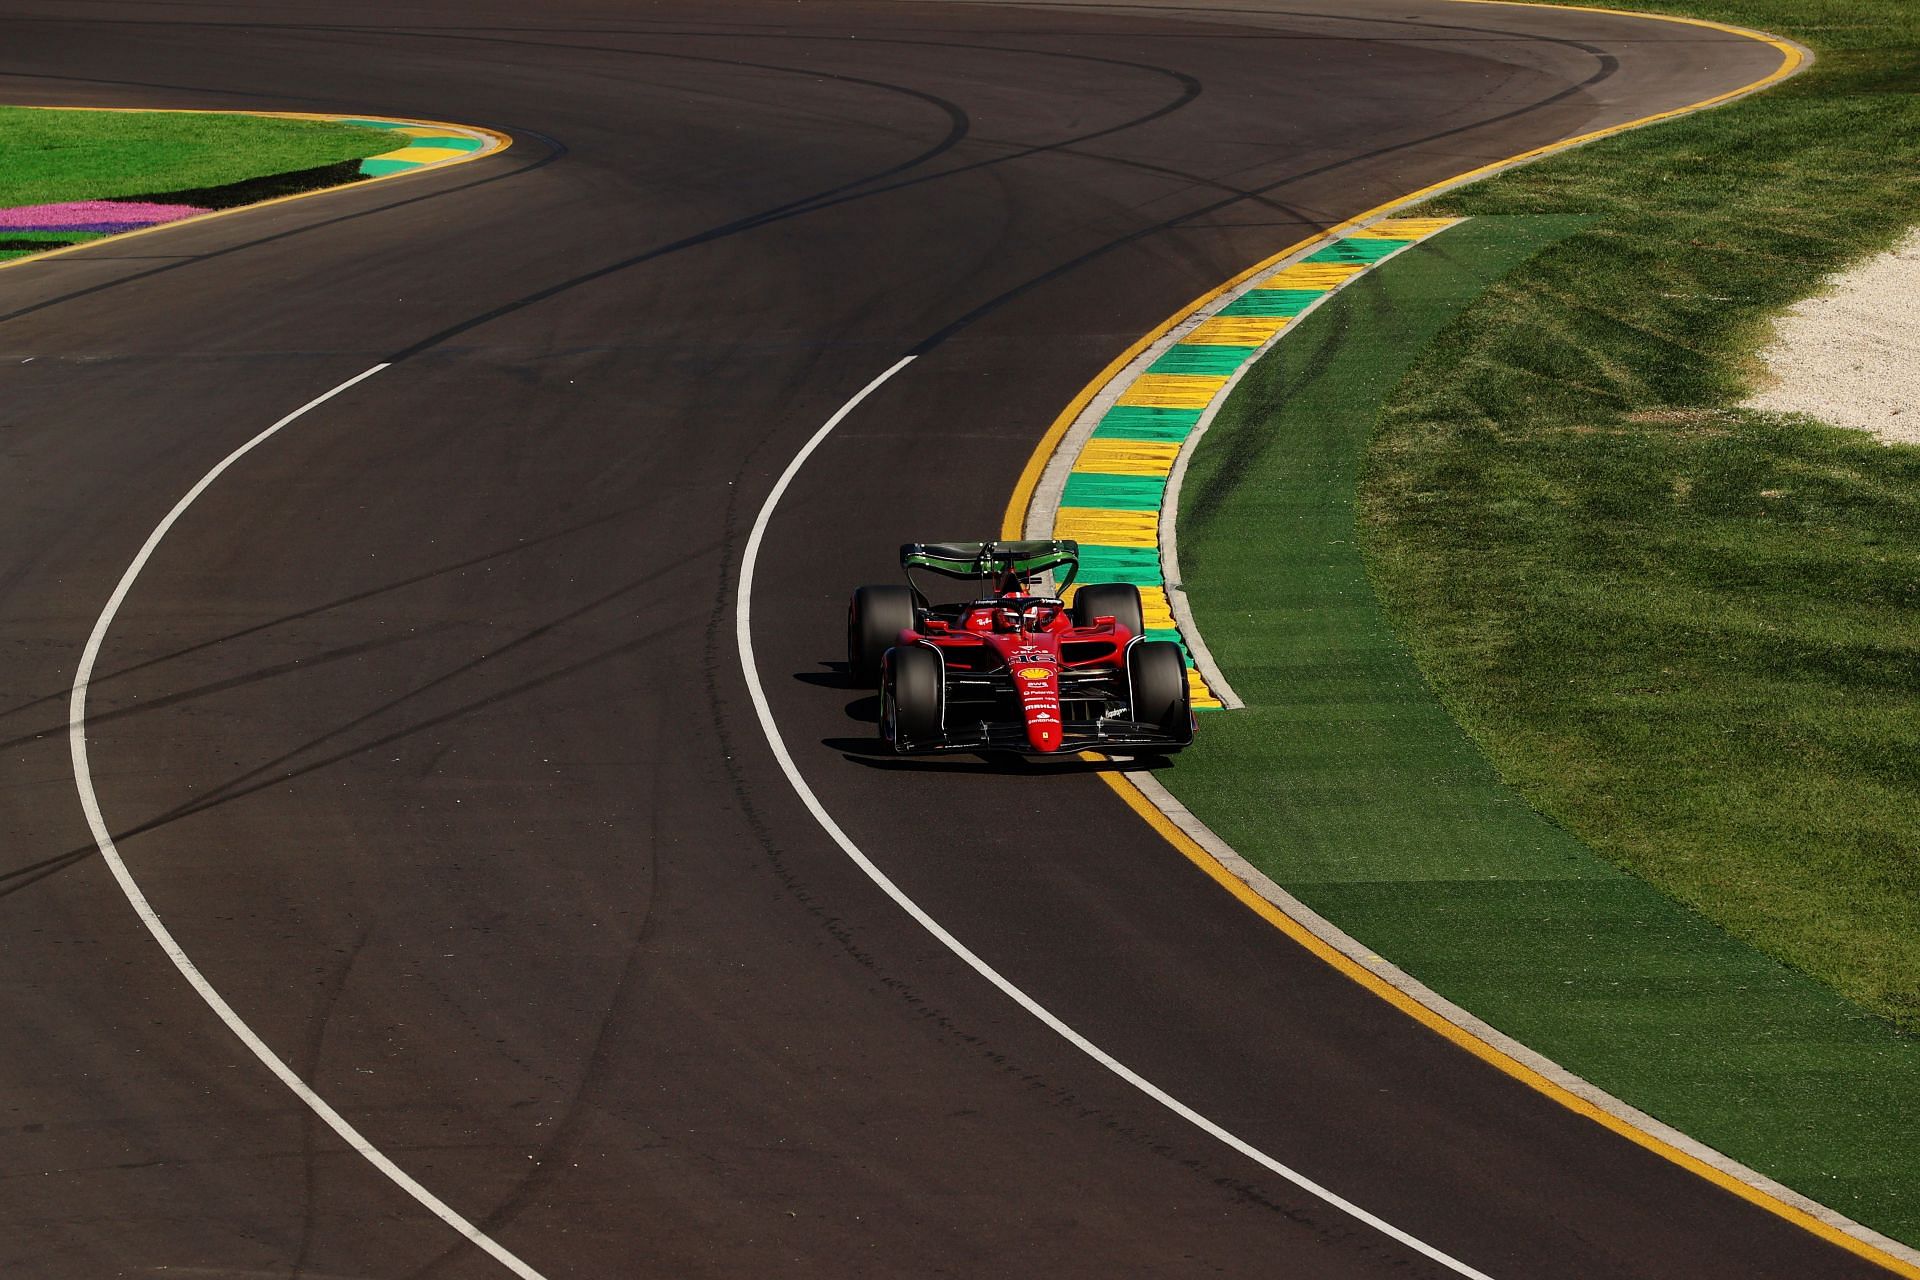 Ferrari is leaning on the data from the previous Australian GPs to prepare for the race